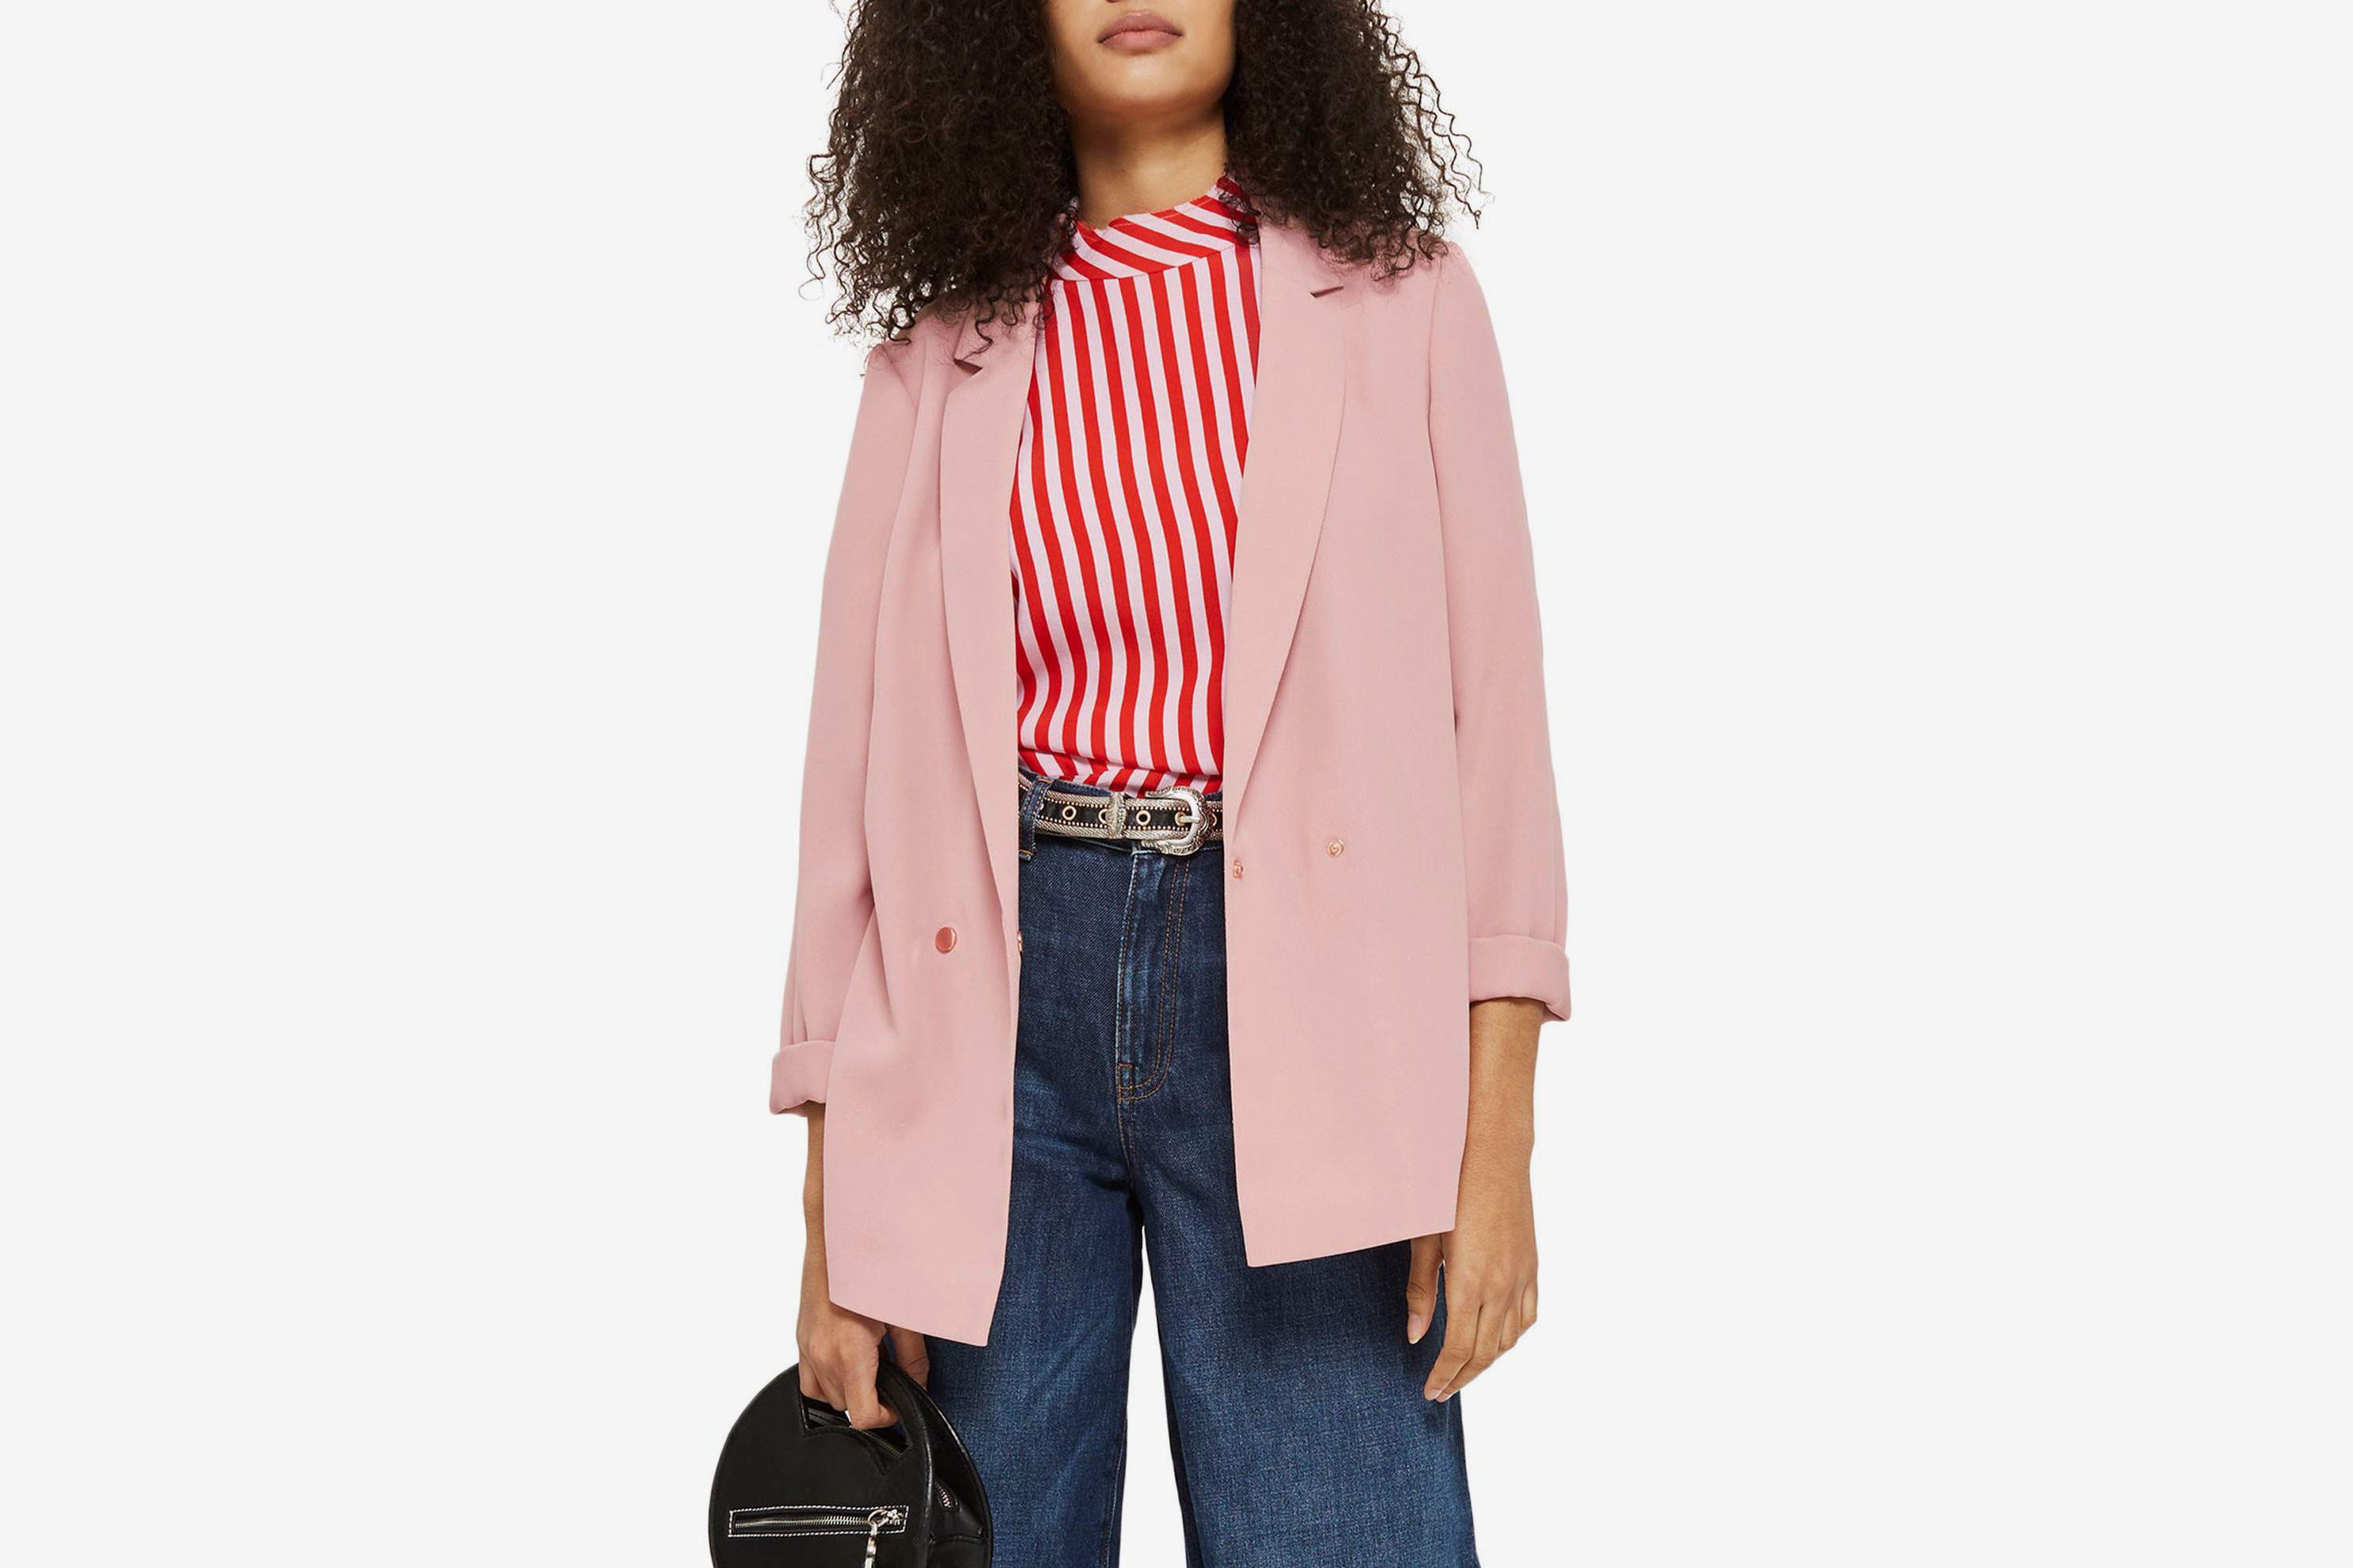 Topshop Ava Double Breasted Jacket